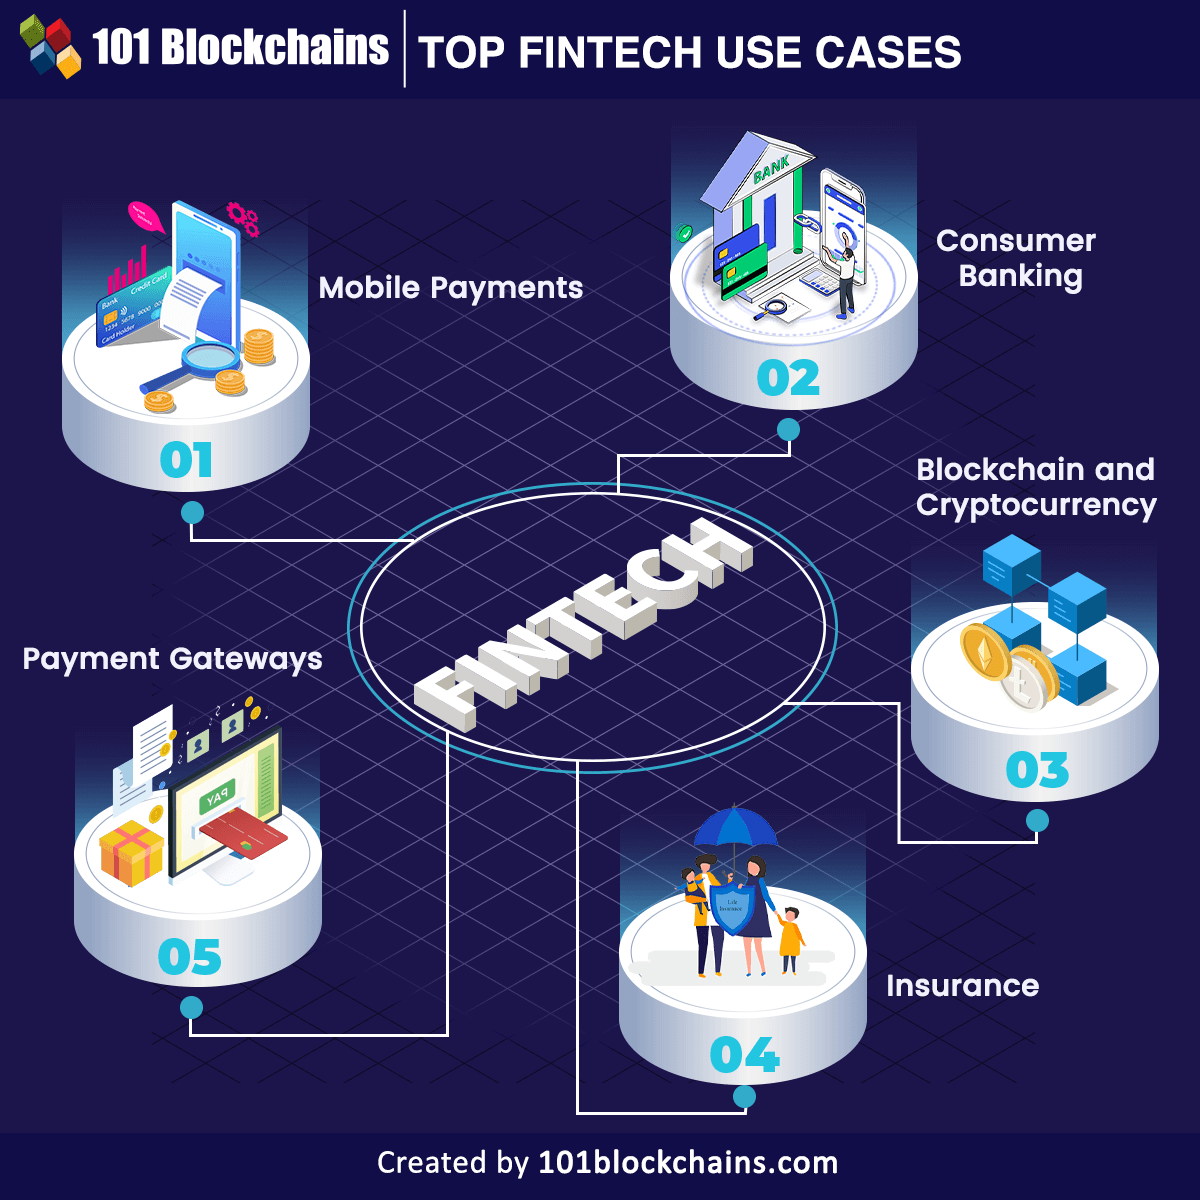 Fintech uses and examples: Mobile payments, consumer banking, Blockchain and crypto, insurance and payment gateway